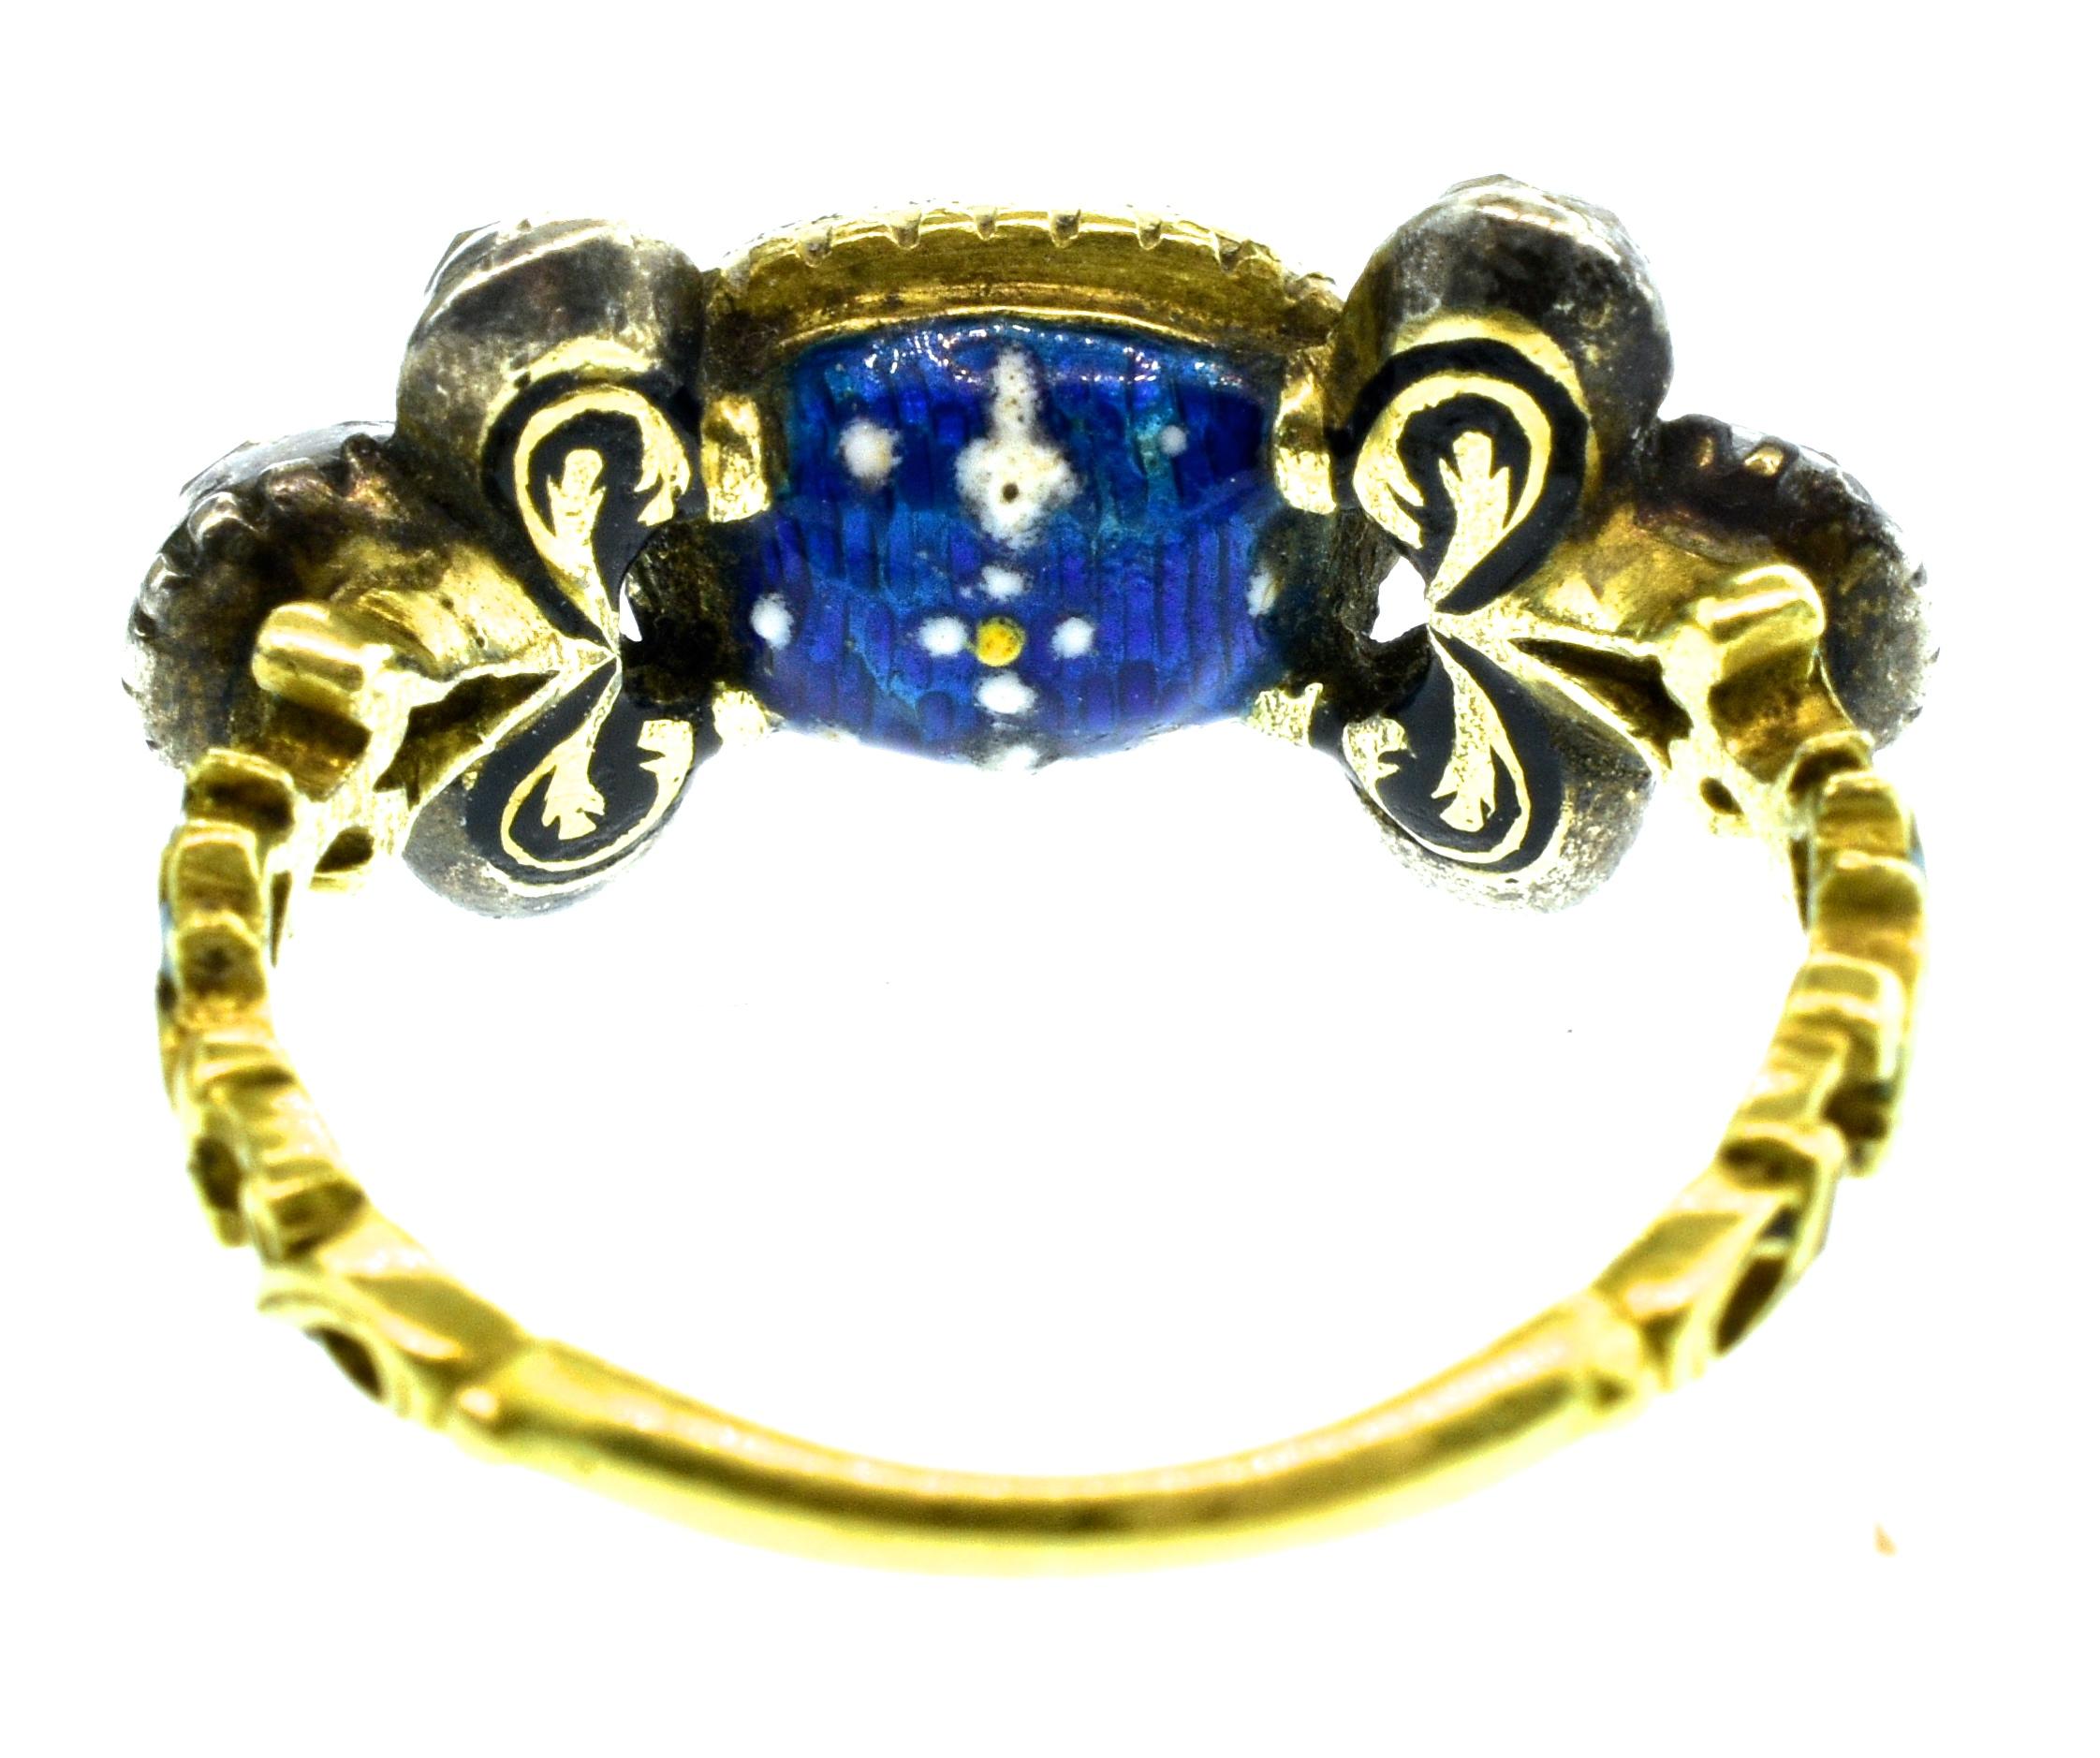 Baroque Antique Spinel, Gold and Silver Ring, circa 1750